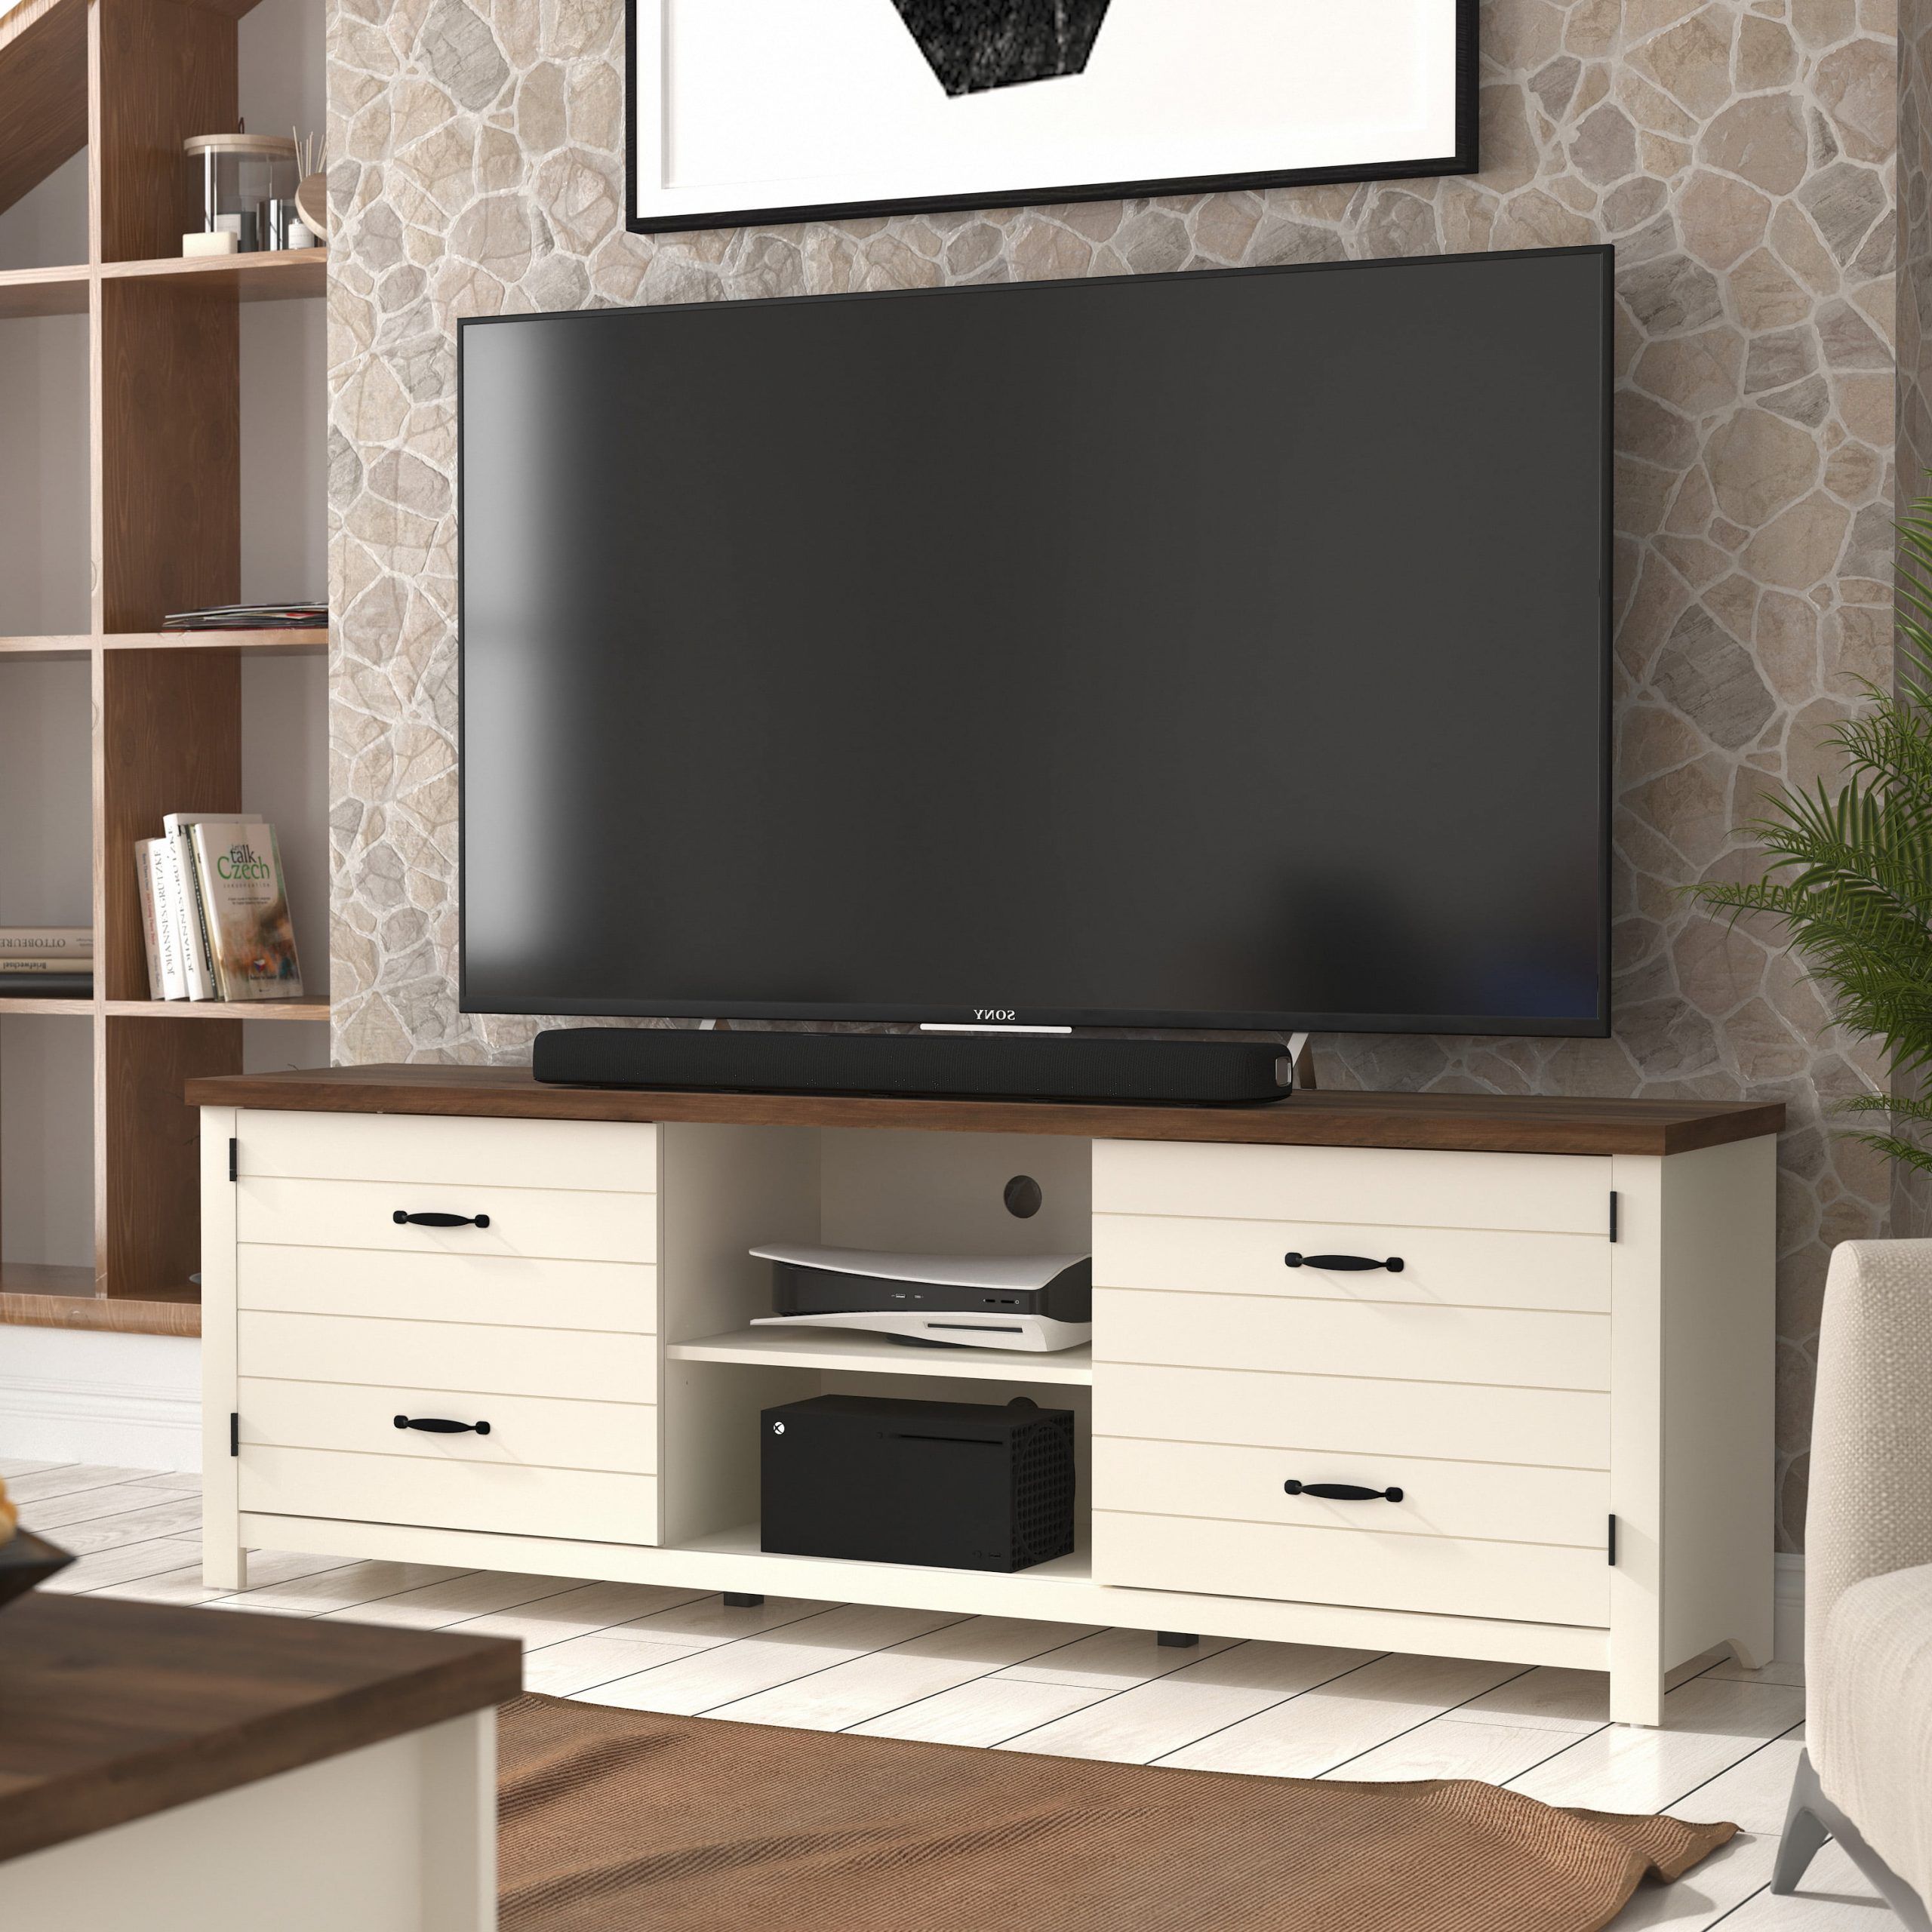 Latest Lancaster Farmhouse 70” Tv Stand With Charging Station For Tv's Up To 75”,  Ivory/oak – Walmart Pertaining To Tv Stands With Charging Station (View 5 of 10)